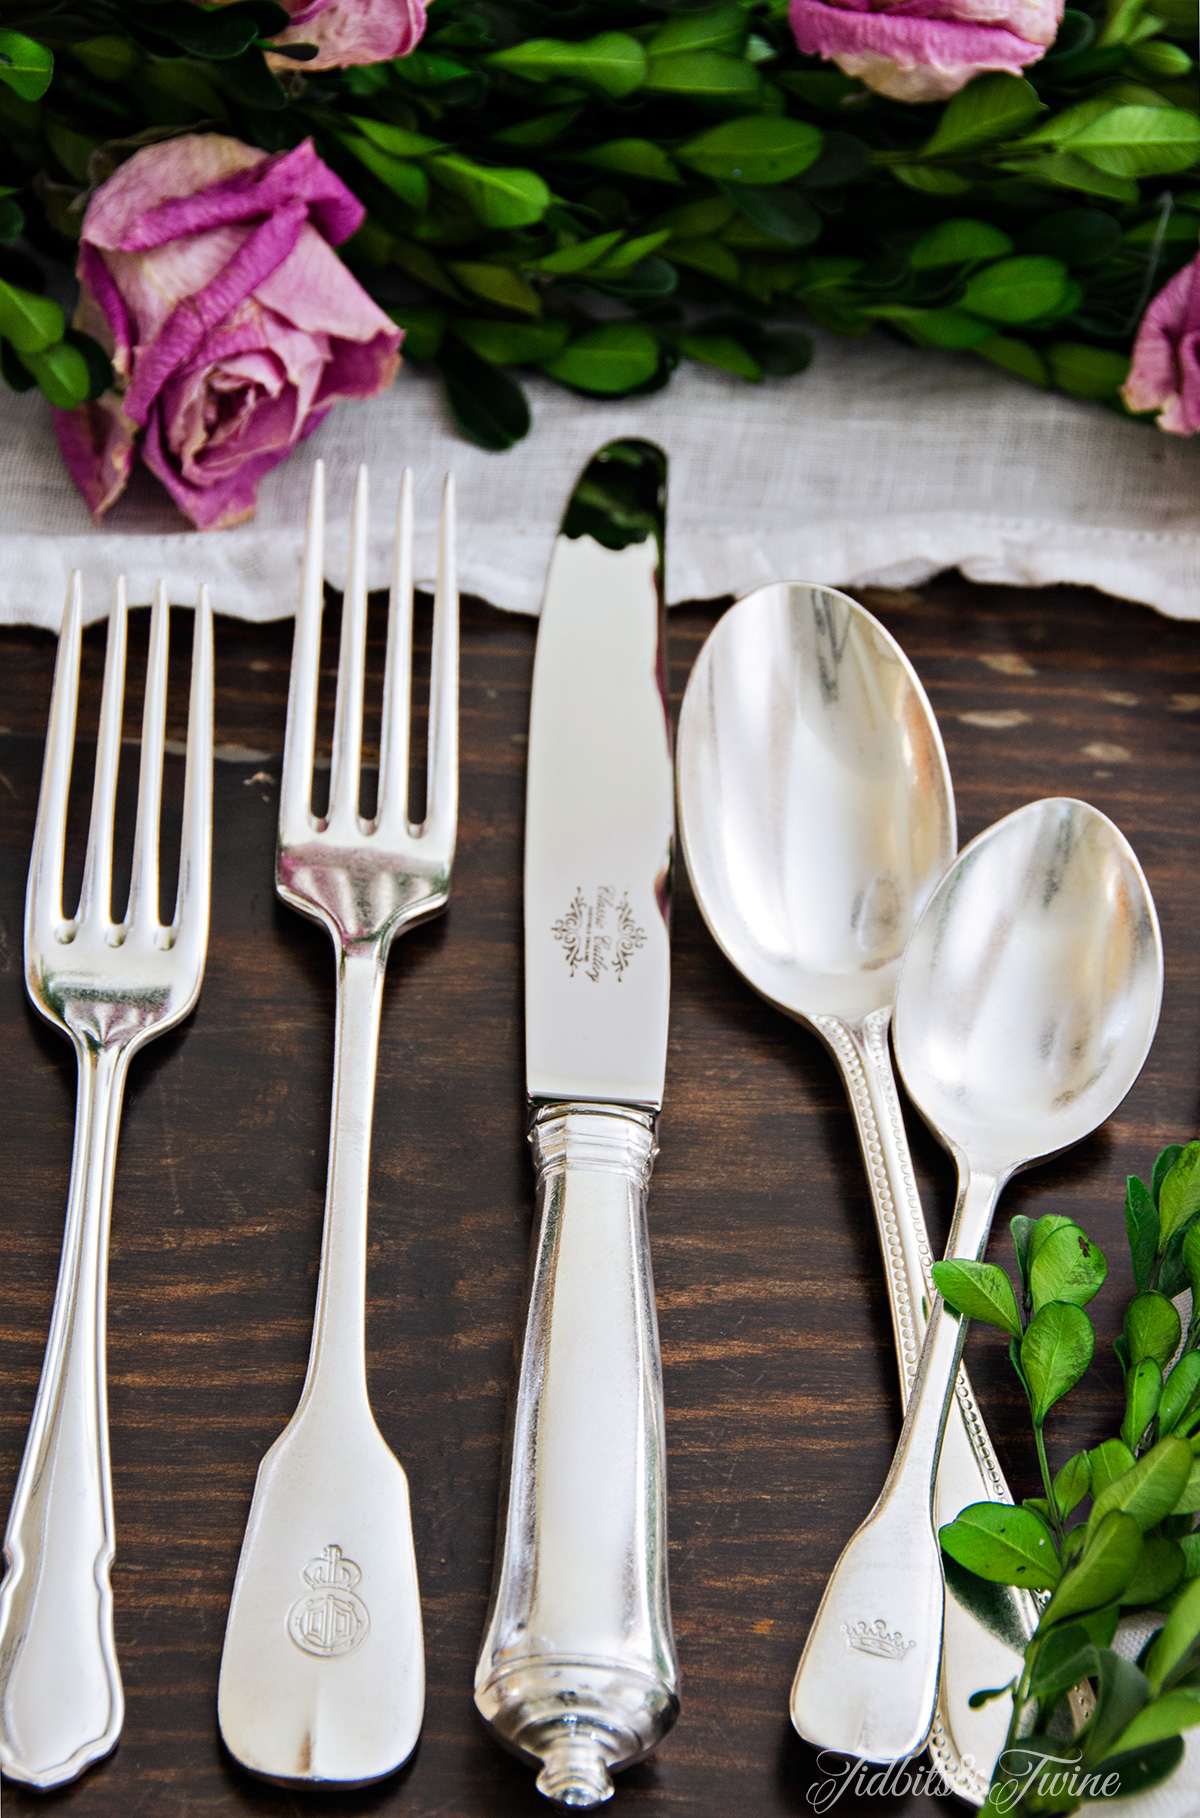 TIDBITS-&-TWINE-Vintage-Flatware-and-Roses